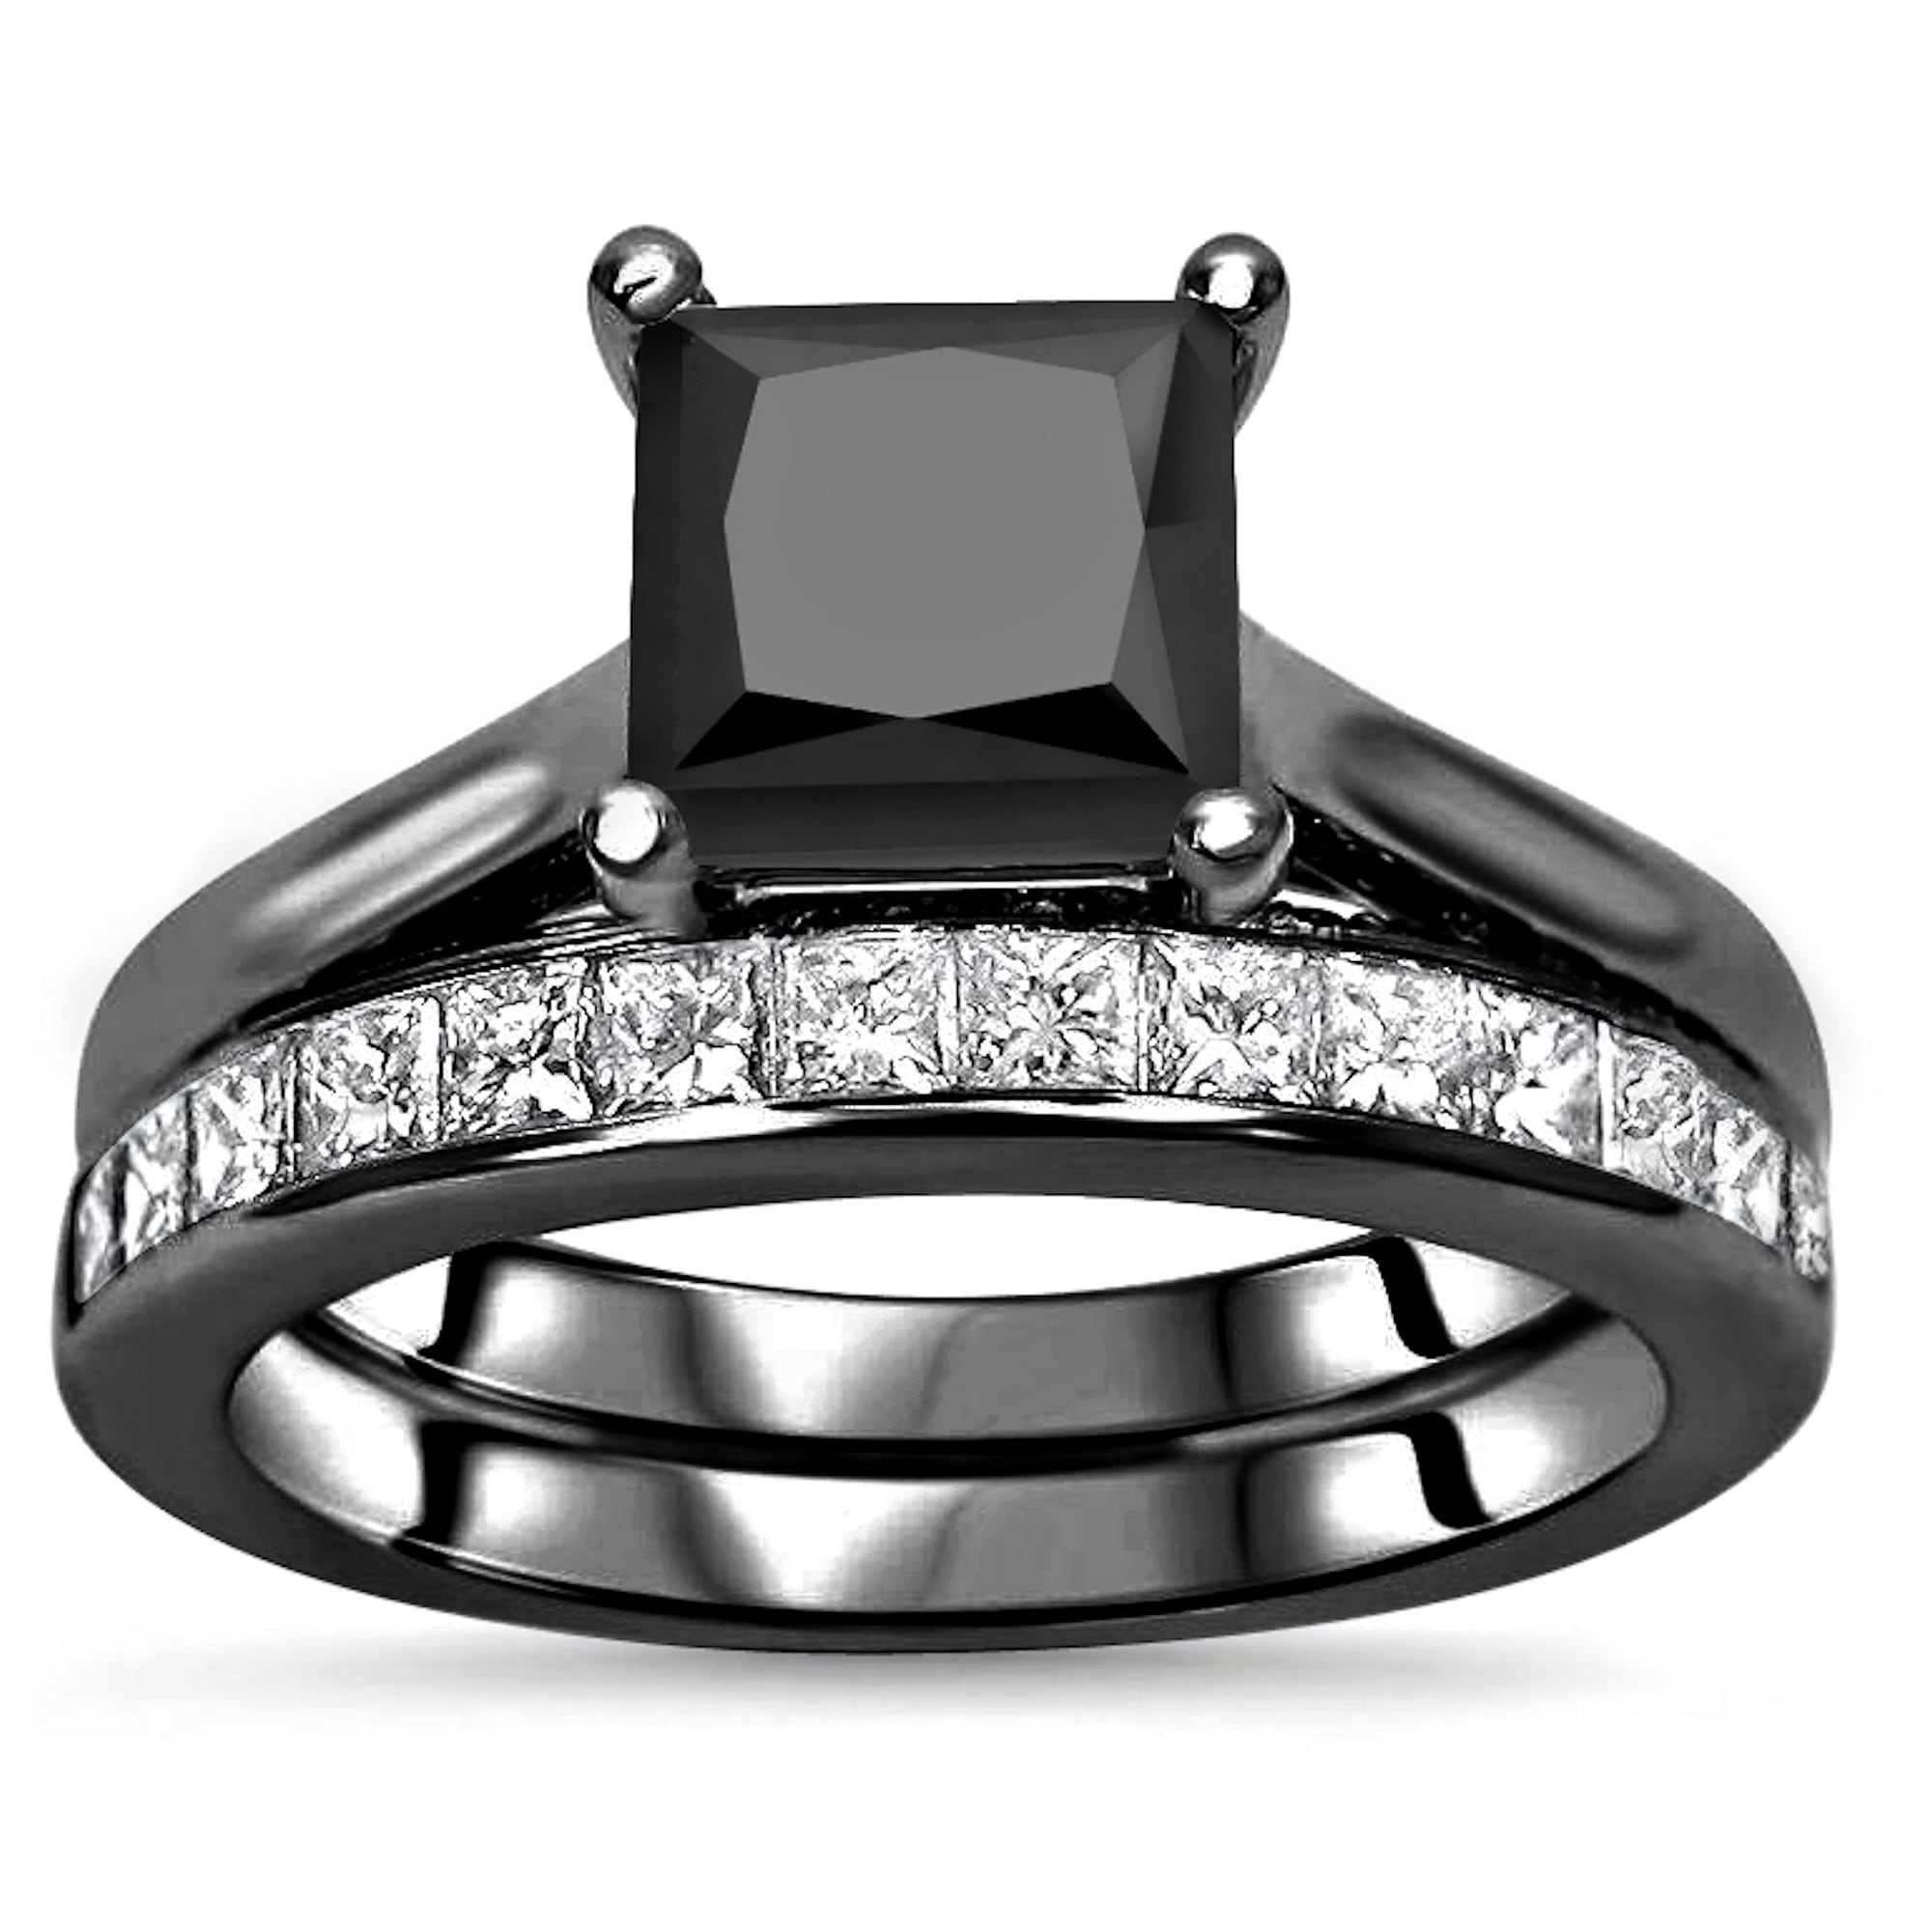 White Gold Black Diamond Engagement Ring : See more ideas about black ...